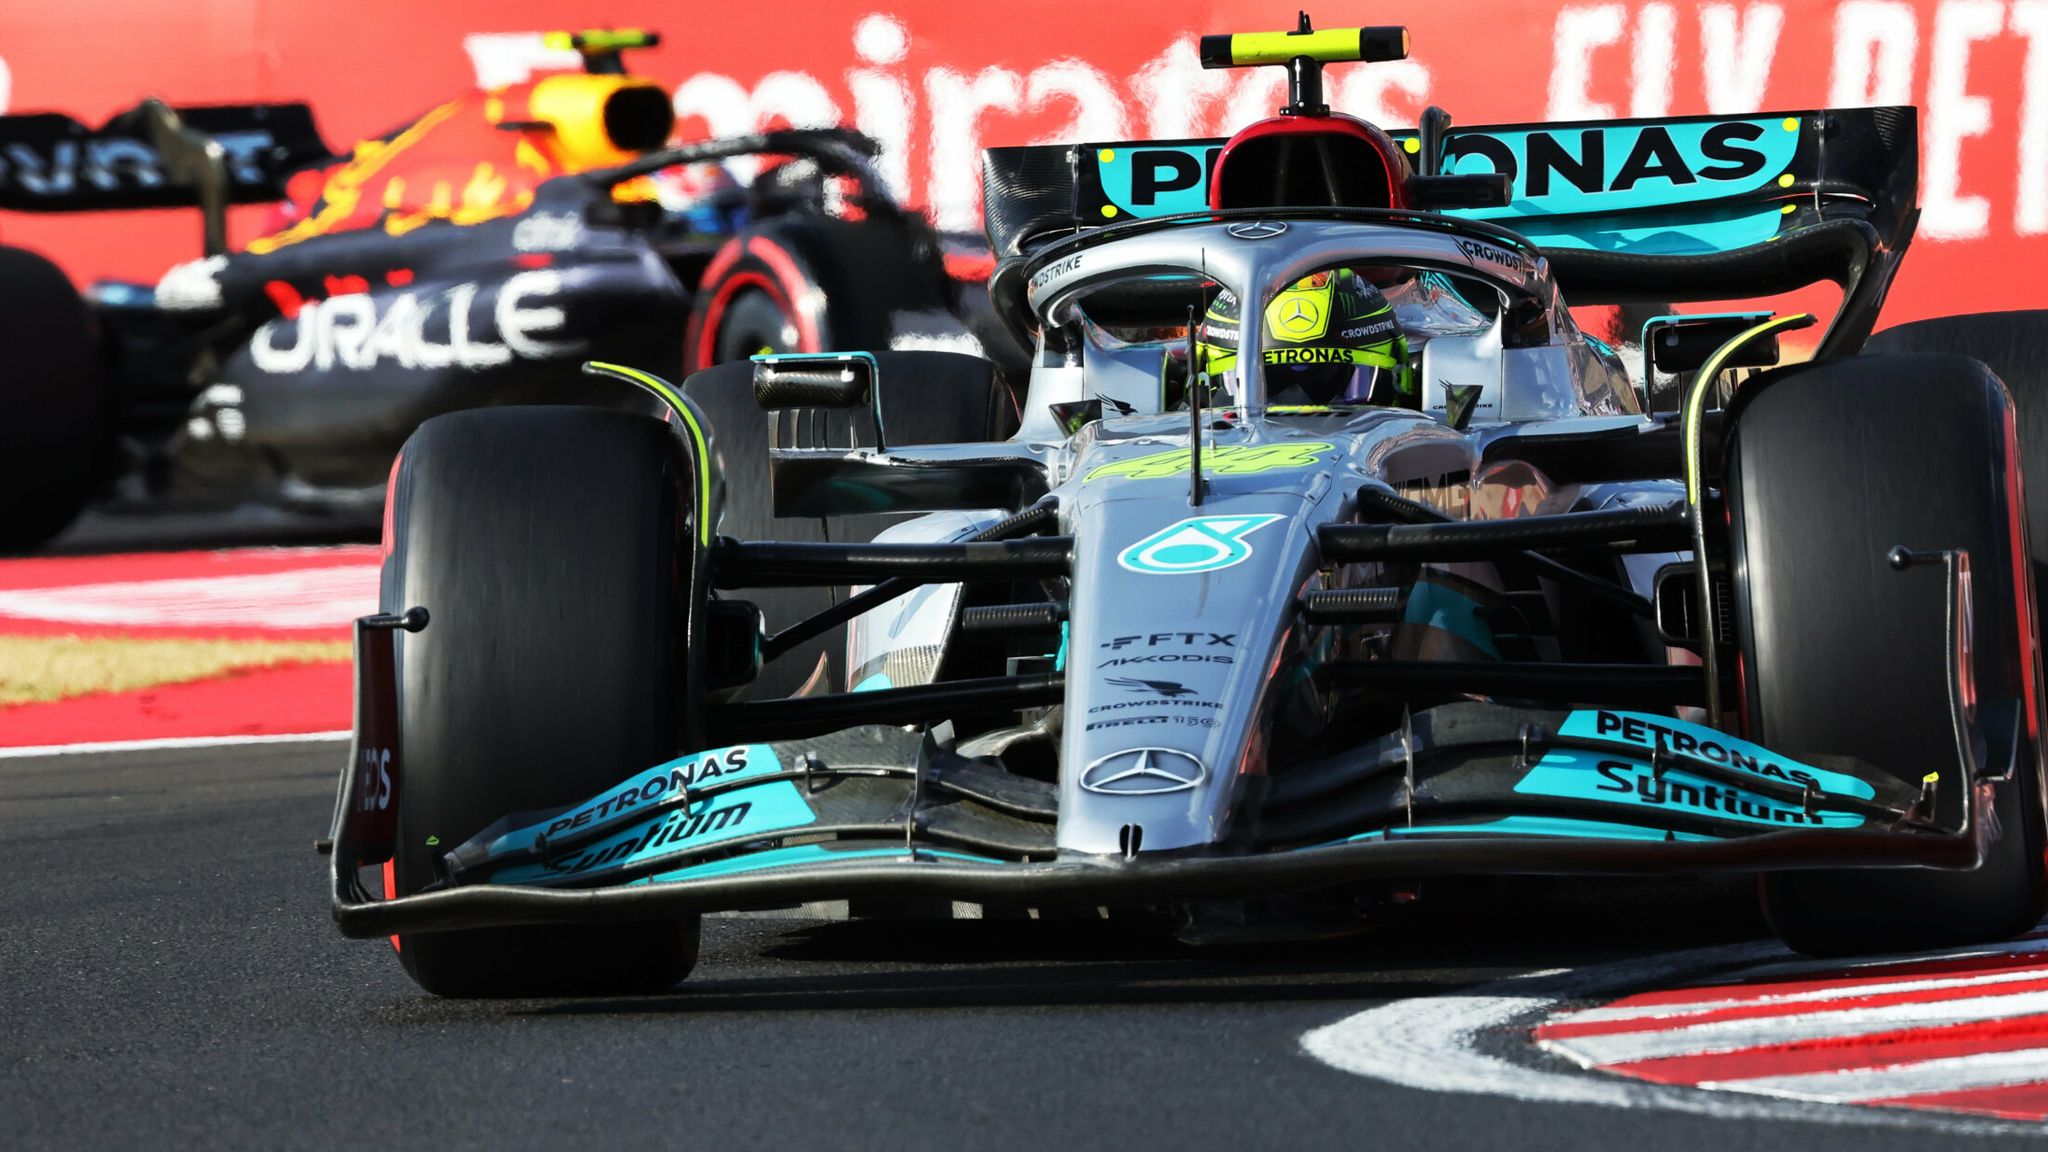 Mercedes Why There S Now Light At The End Of The Tunnel As Poor 22 Recharges F1 Team For Red Bull Fight F1 News